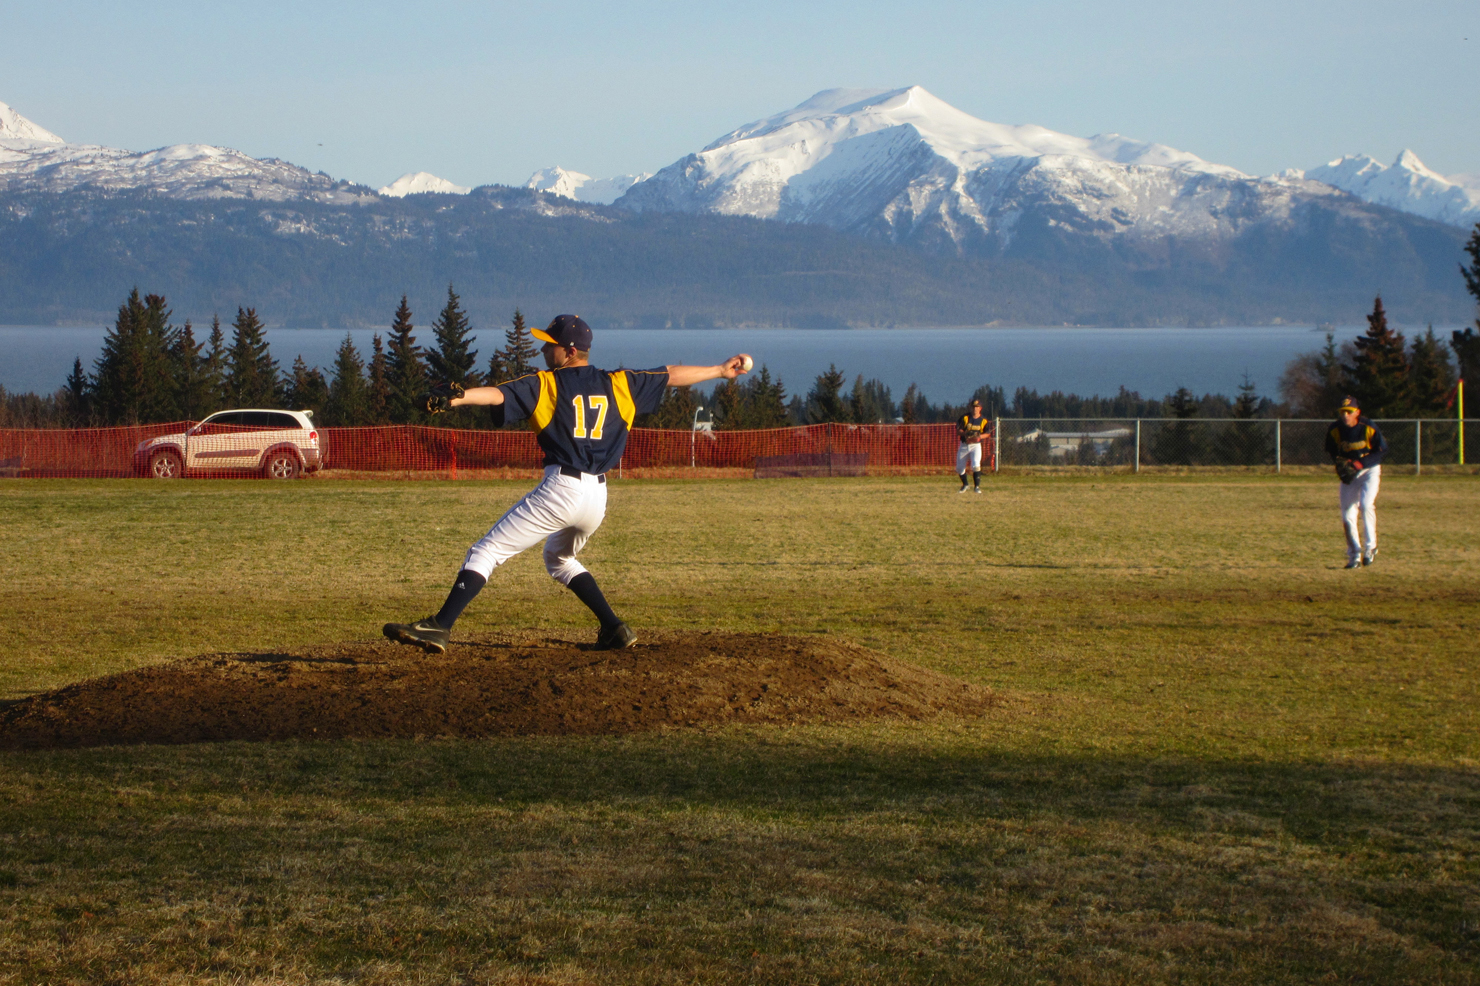 Kyle Johnson pitches the win during the Mariners’ opening game of the season on their home turf. The Mariners defeated Kenai Central 10-2.-Photo by Wendy Wayne